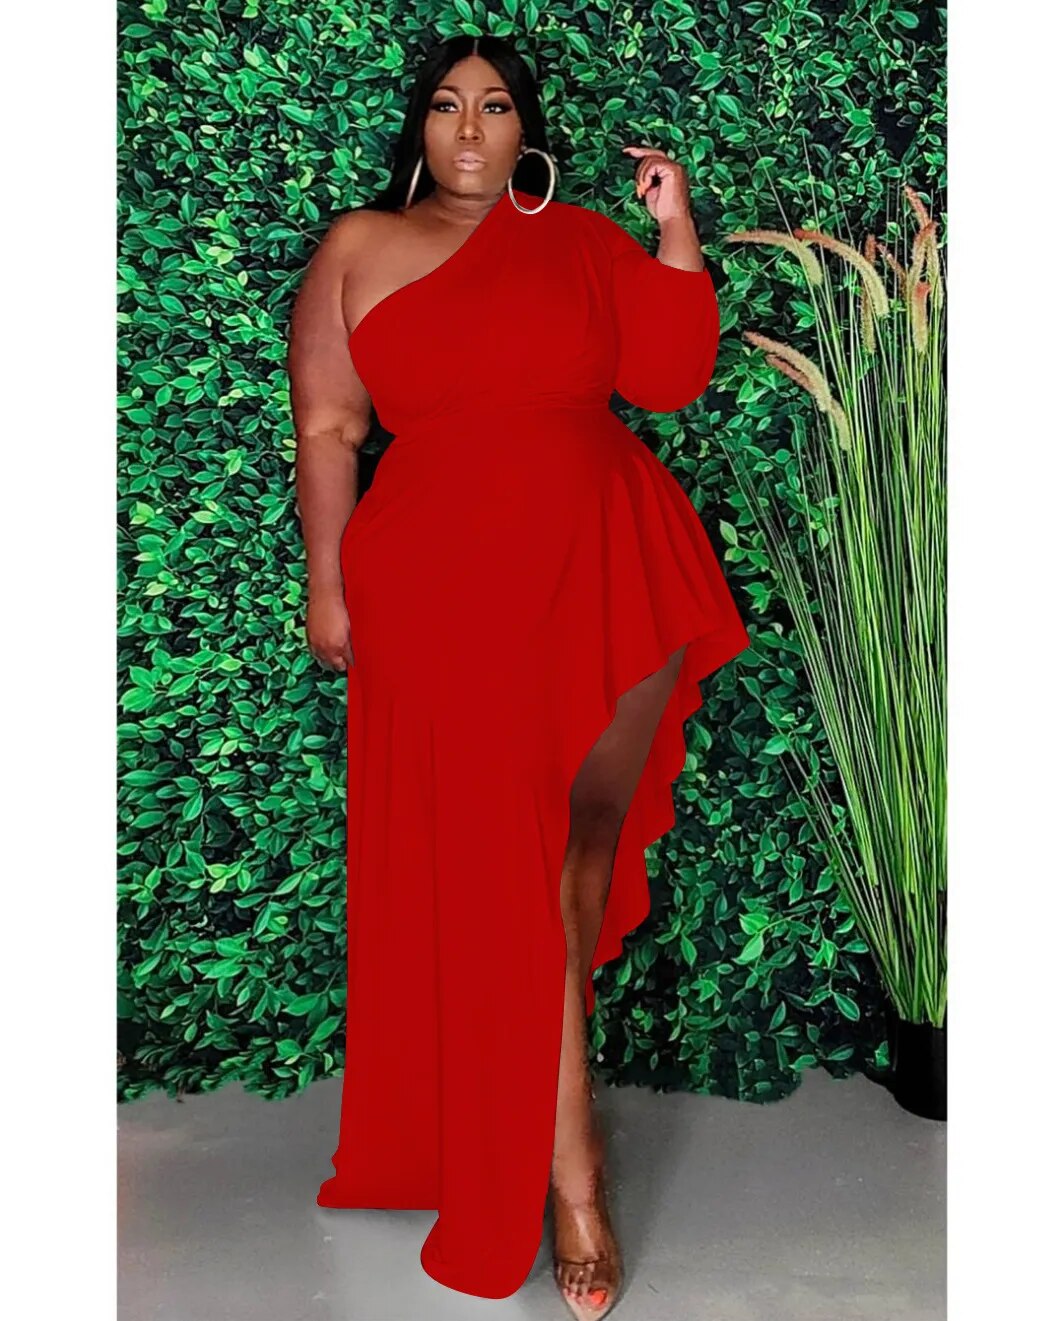 Plus Size One Shoulder Ruffle Dress Red XL 